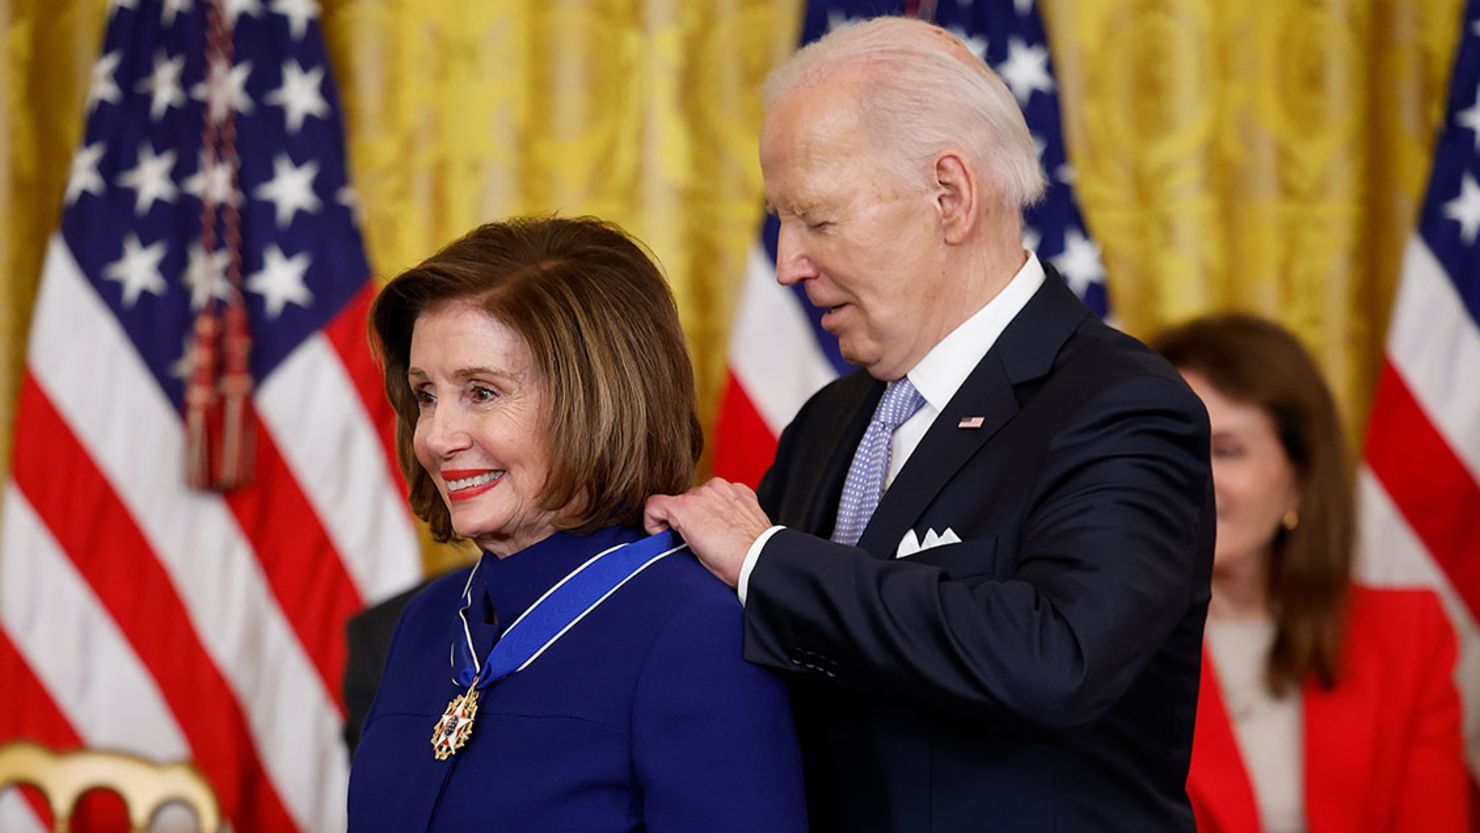 Biden presents Medal of Freedom to key political allies, civil rights  leaders, celebrities and politicians | CNN Politics